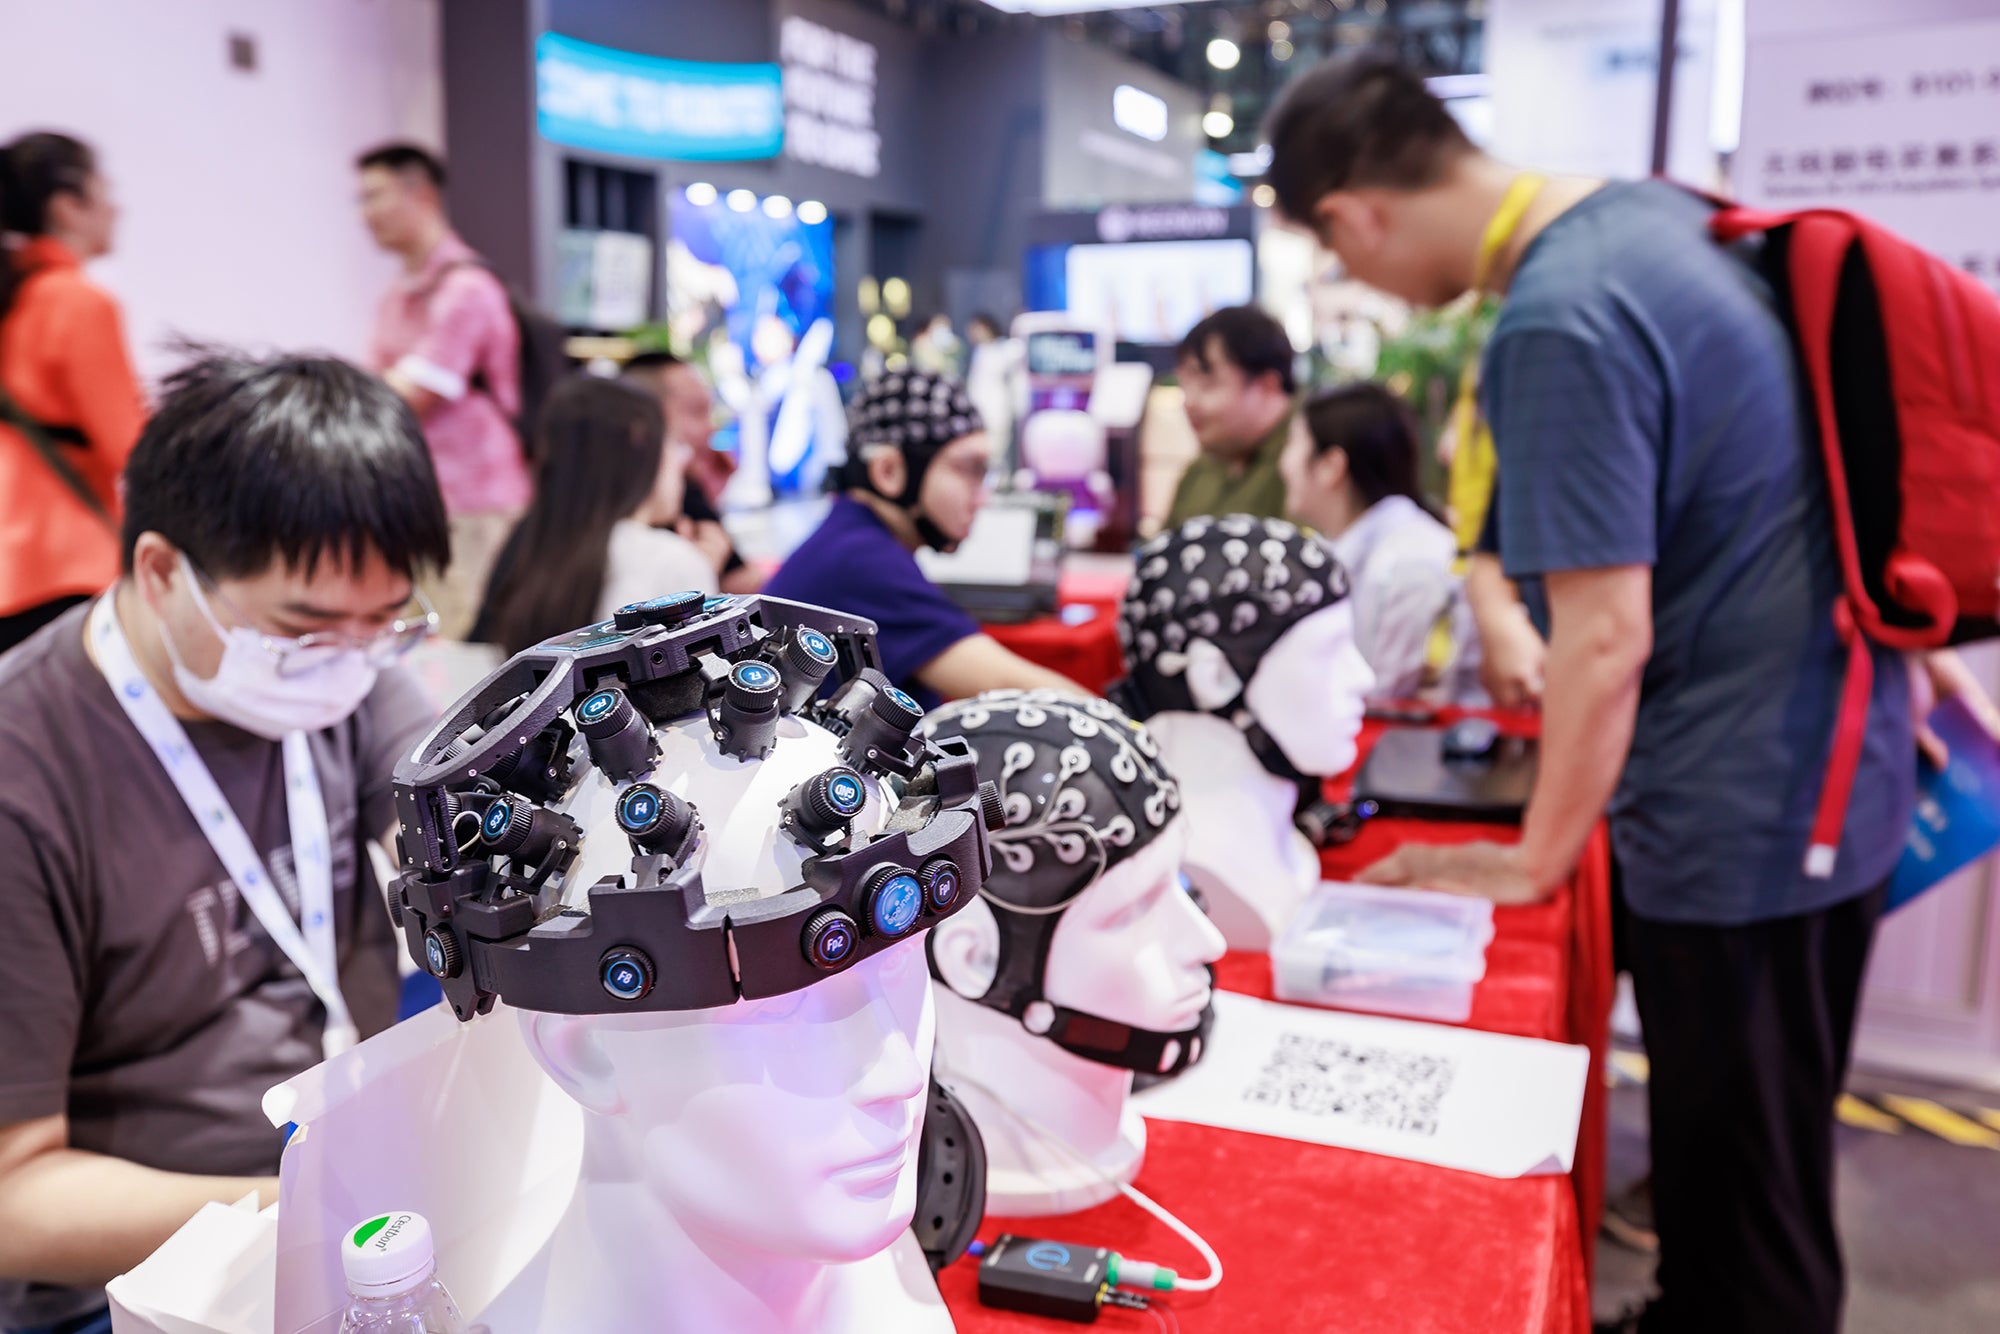 BEIJING, CHINA - AUGUST 19: People visit brain-computer interface (BCI) exhibition area during 2023 World Robot Conference at Beijing Etrong International Exhibition &amp; Convention Center on August 19, 2023 in Beijing, China. (Photo by Zhan Min/VCG via Getty Images)